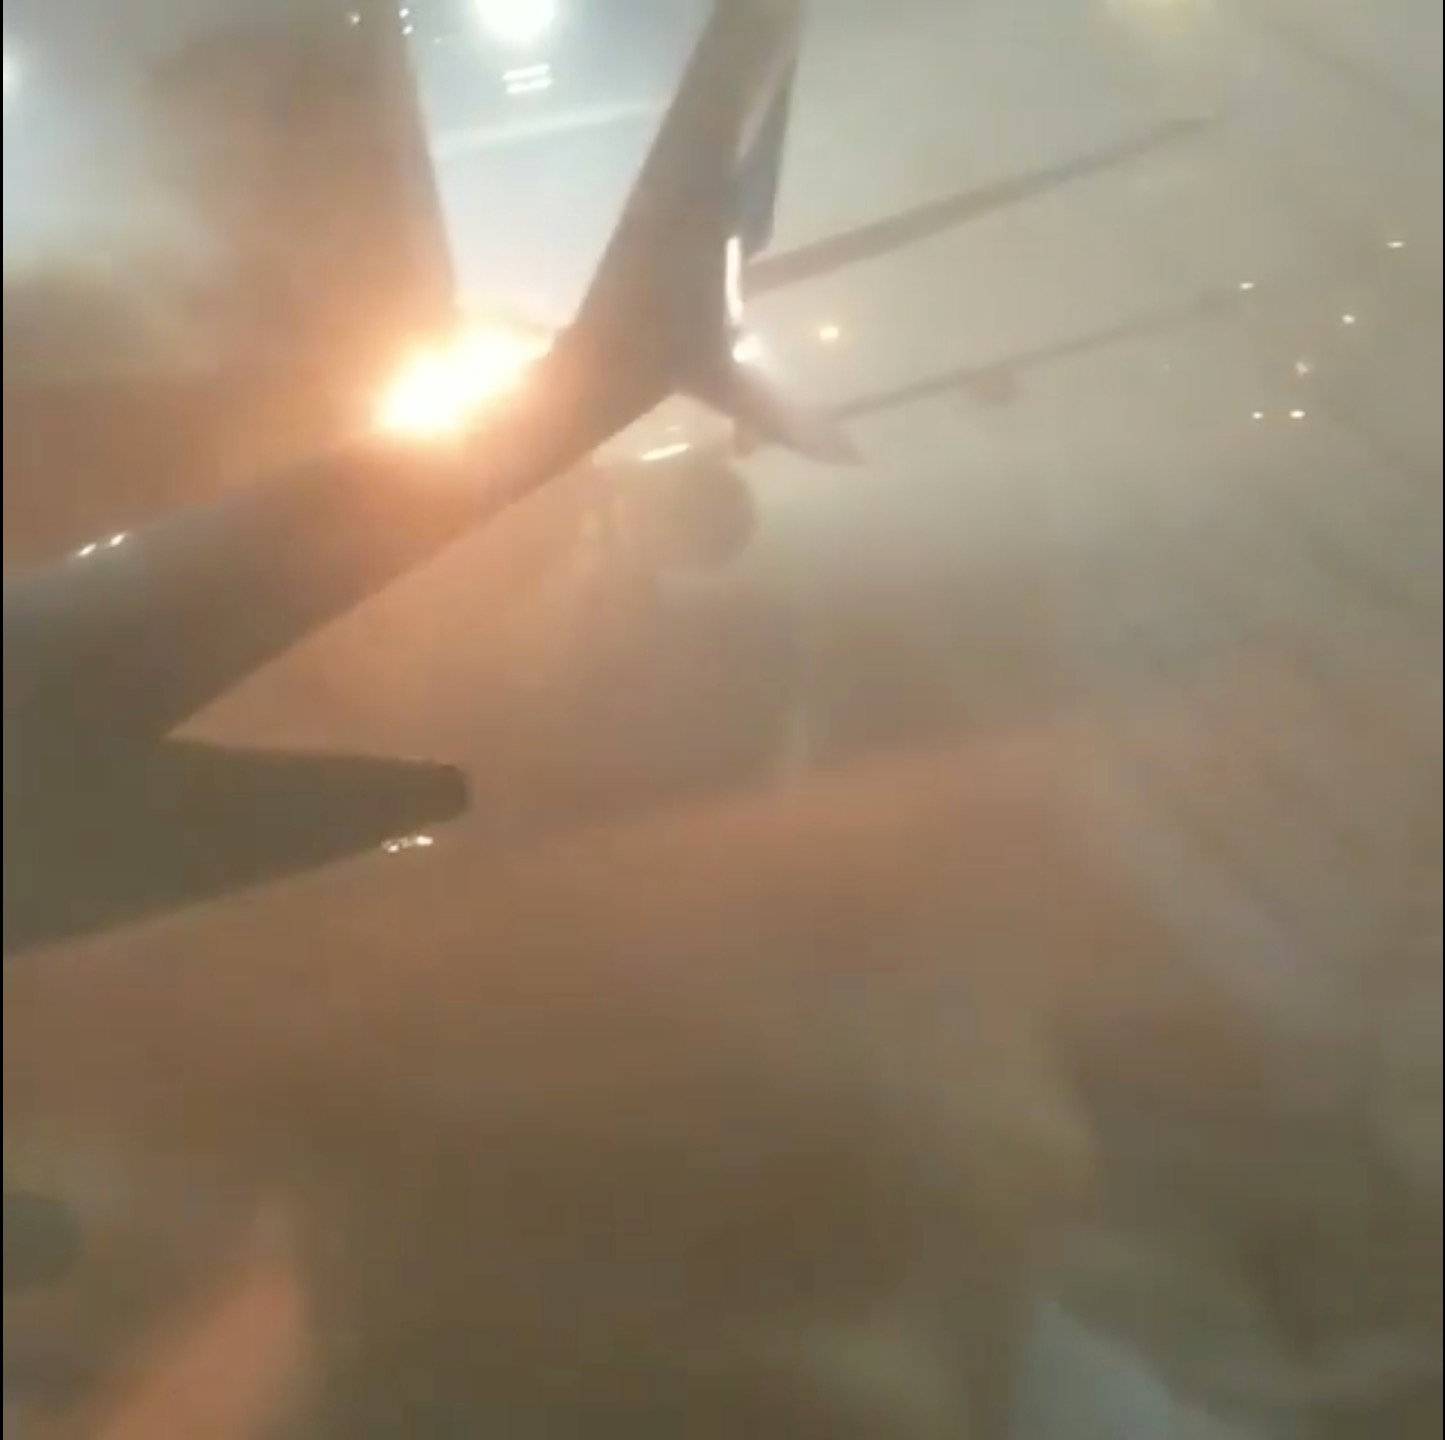 An explosion is seen through a window of a plane that has collided with another plane at Toronto's Pearson Airport, Canada